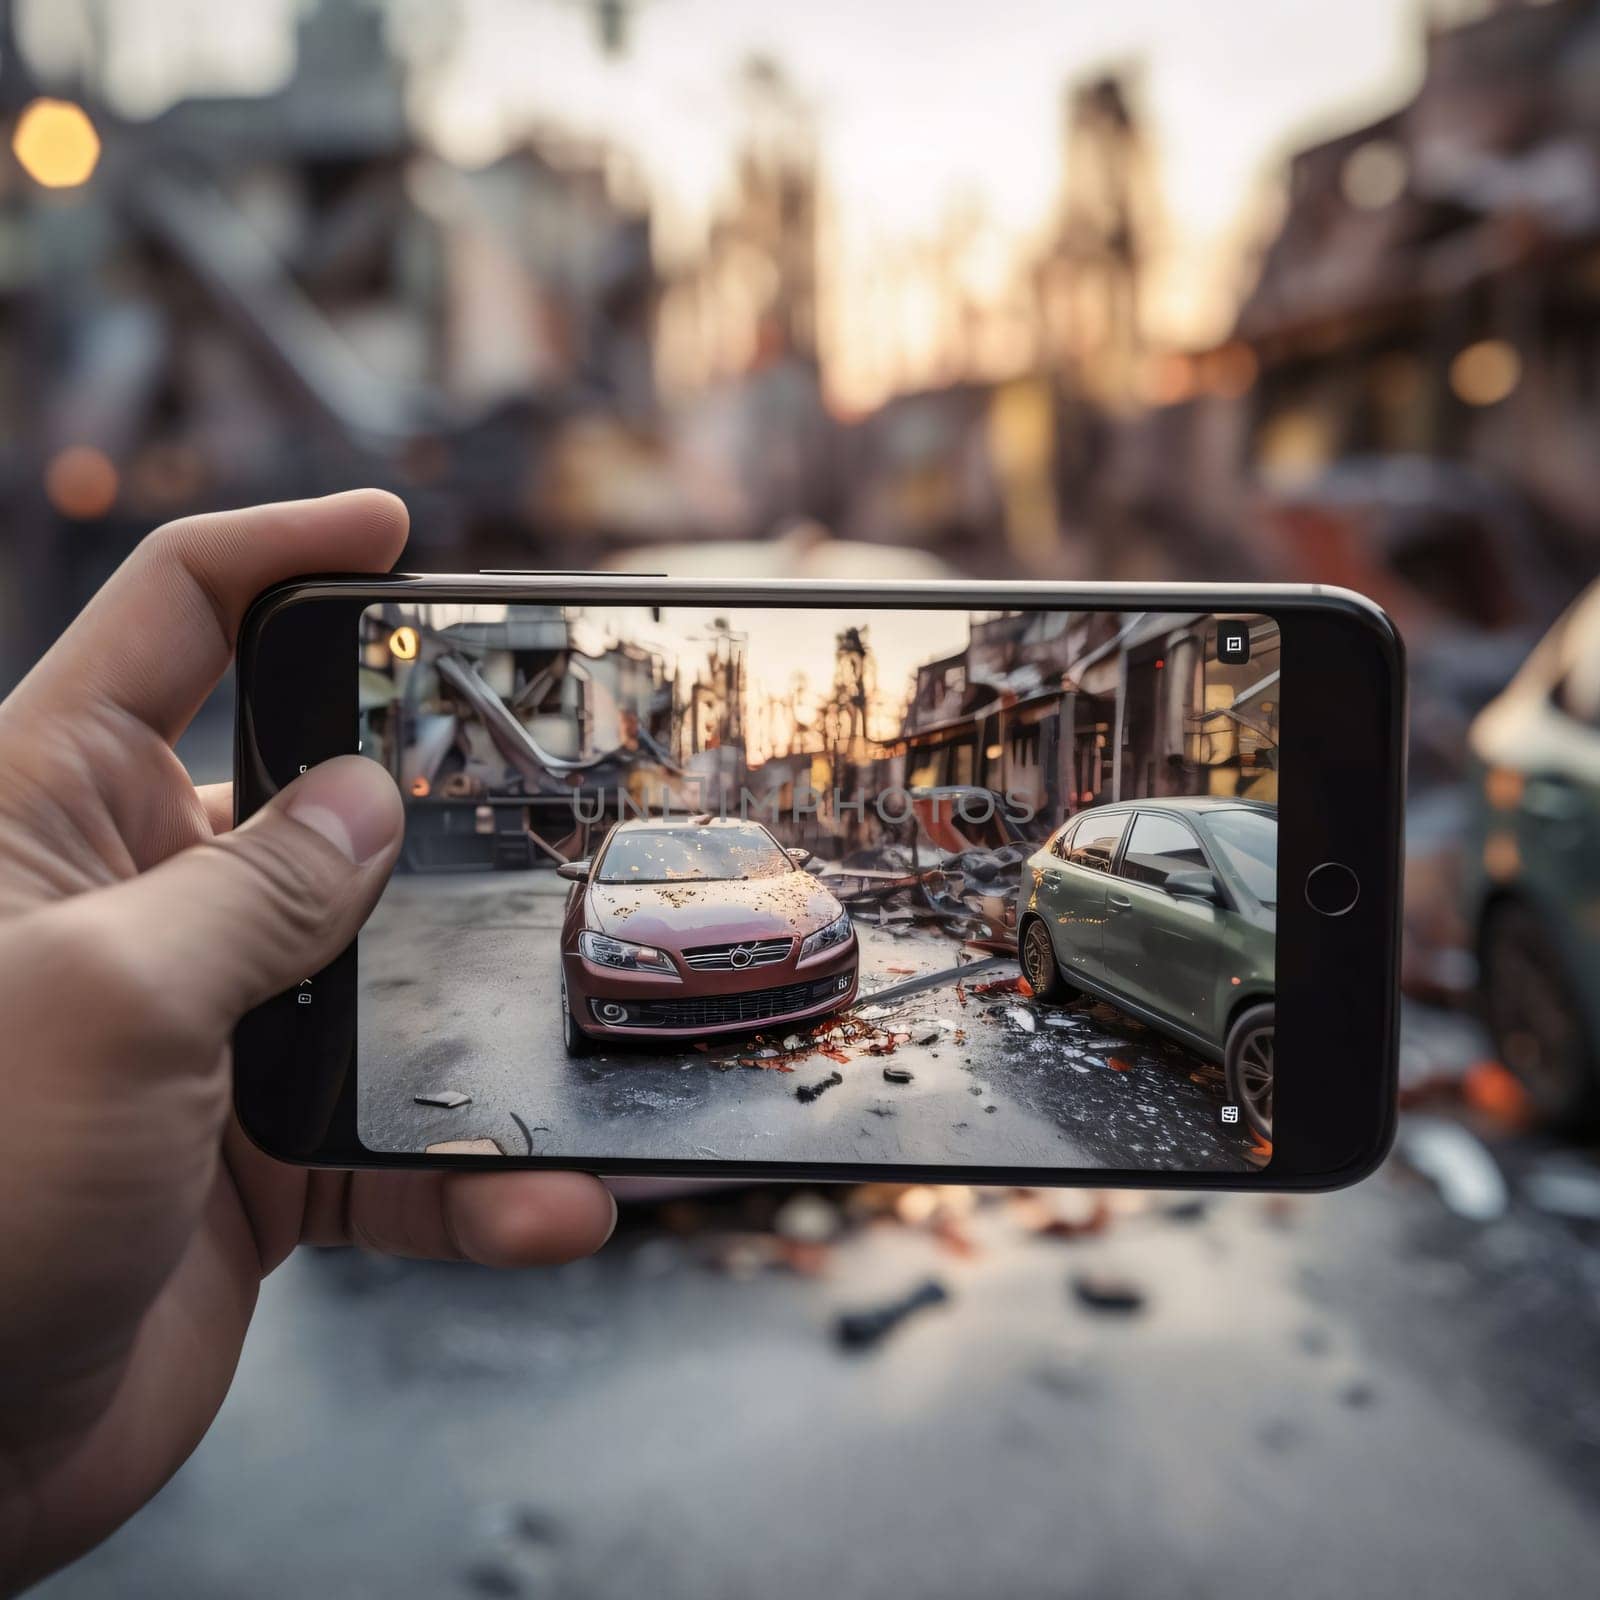 Smartphone screen: Taking a photo of a car accident with a smart phone in the city